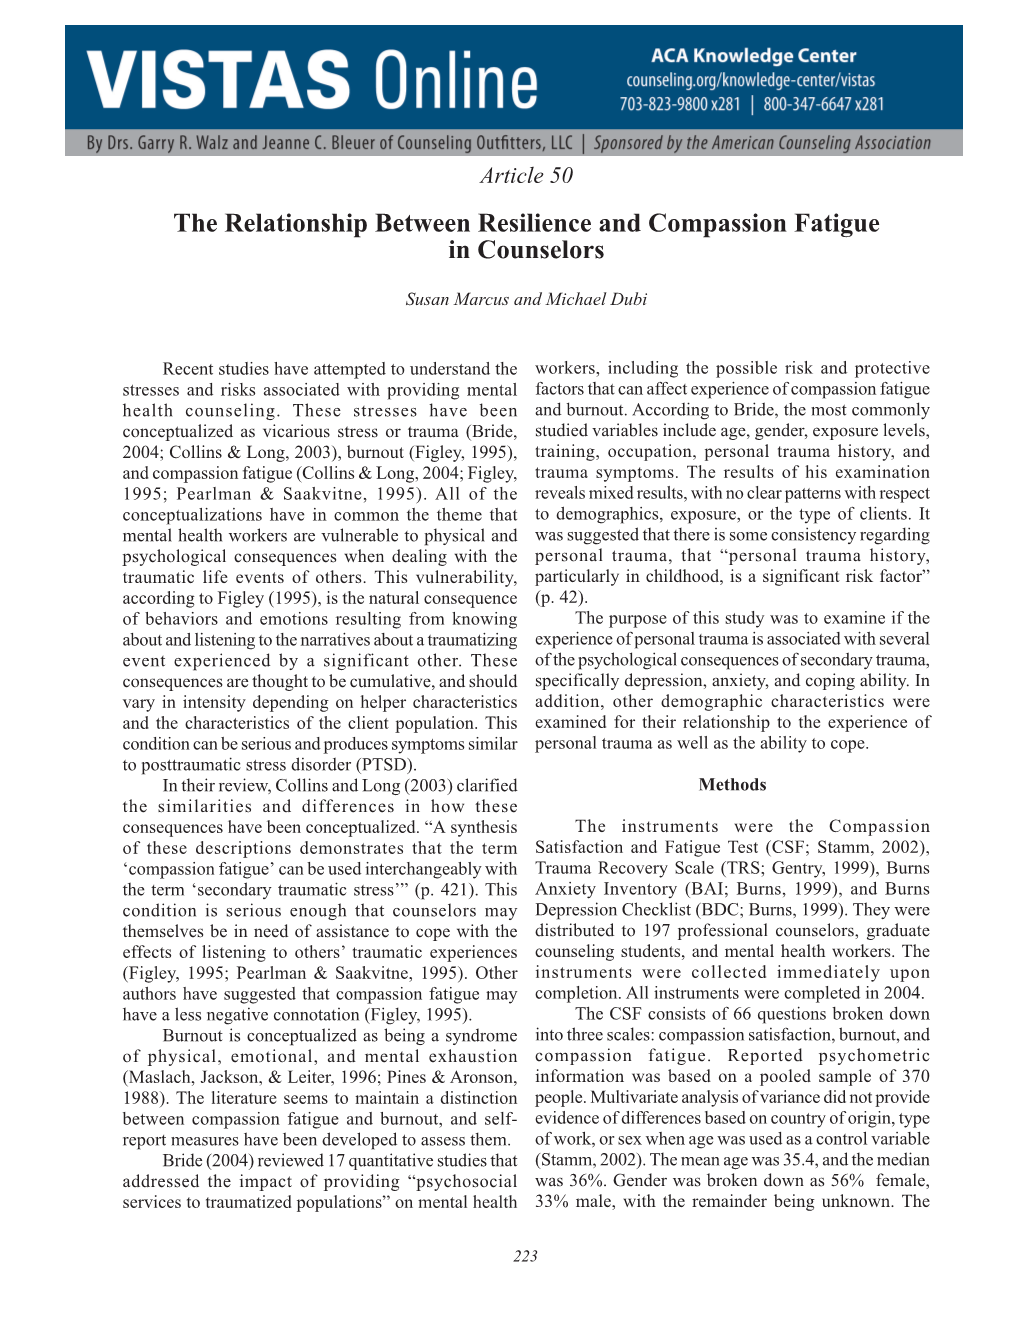 The Relationship Between Resilience and Compassion Fatigue in Counselors